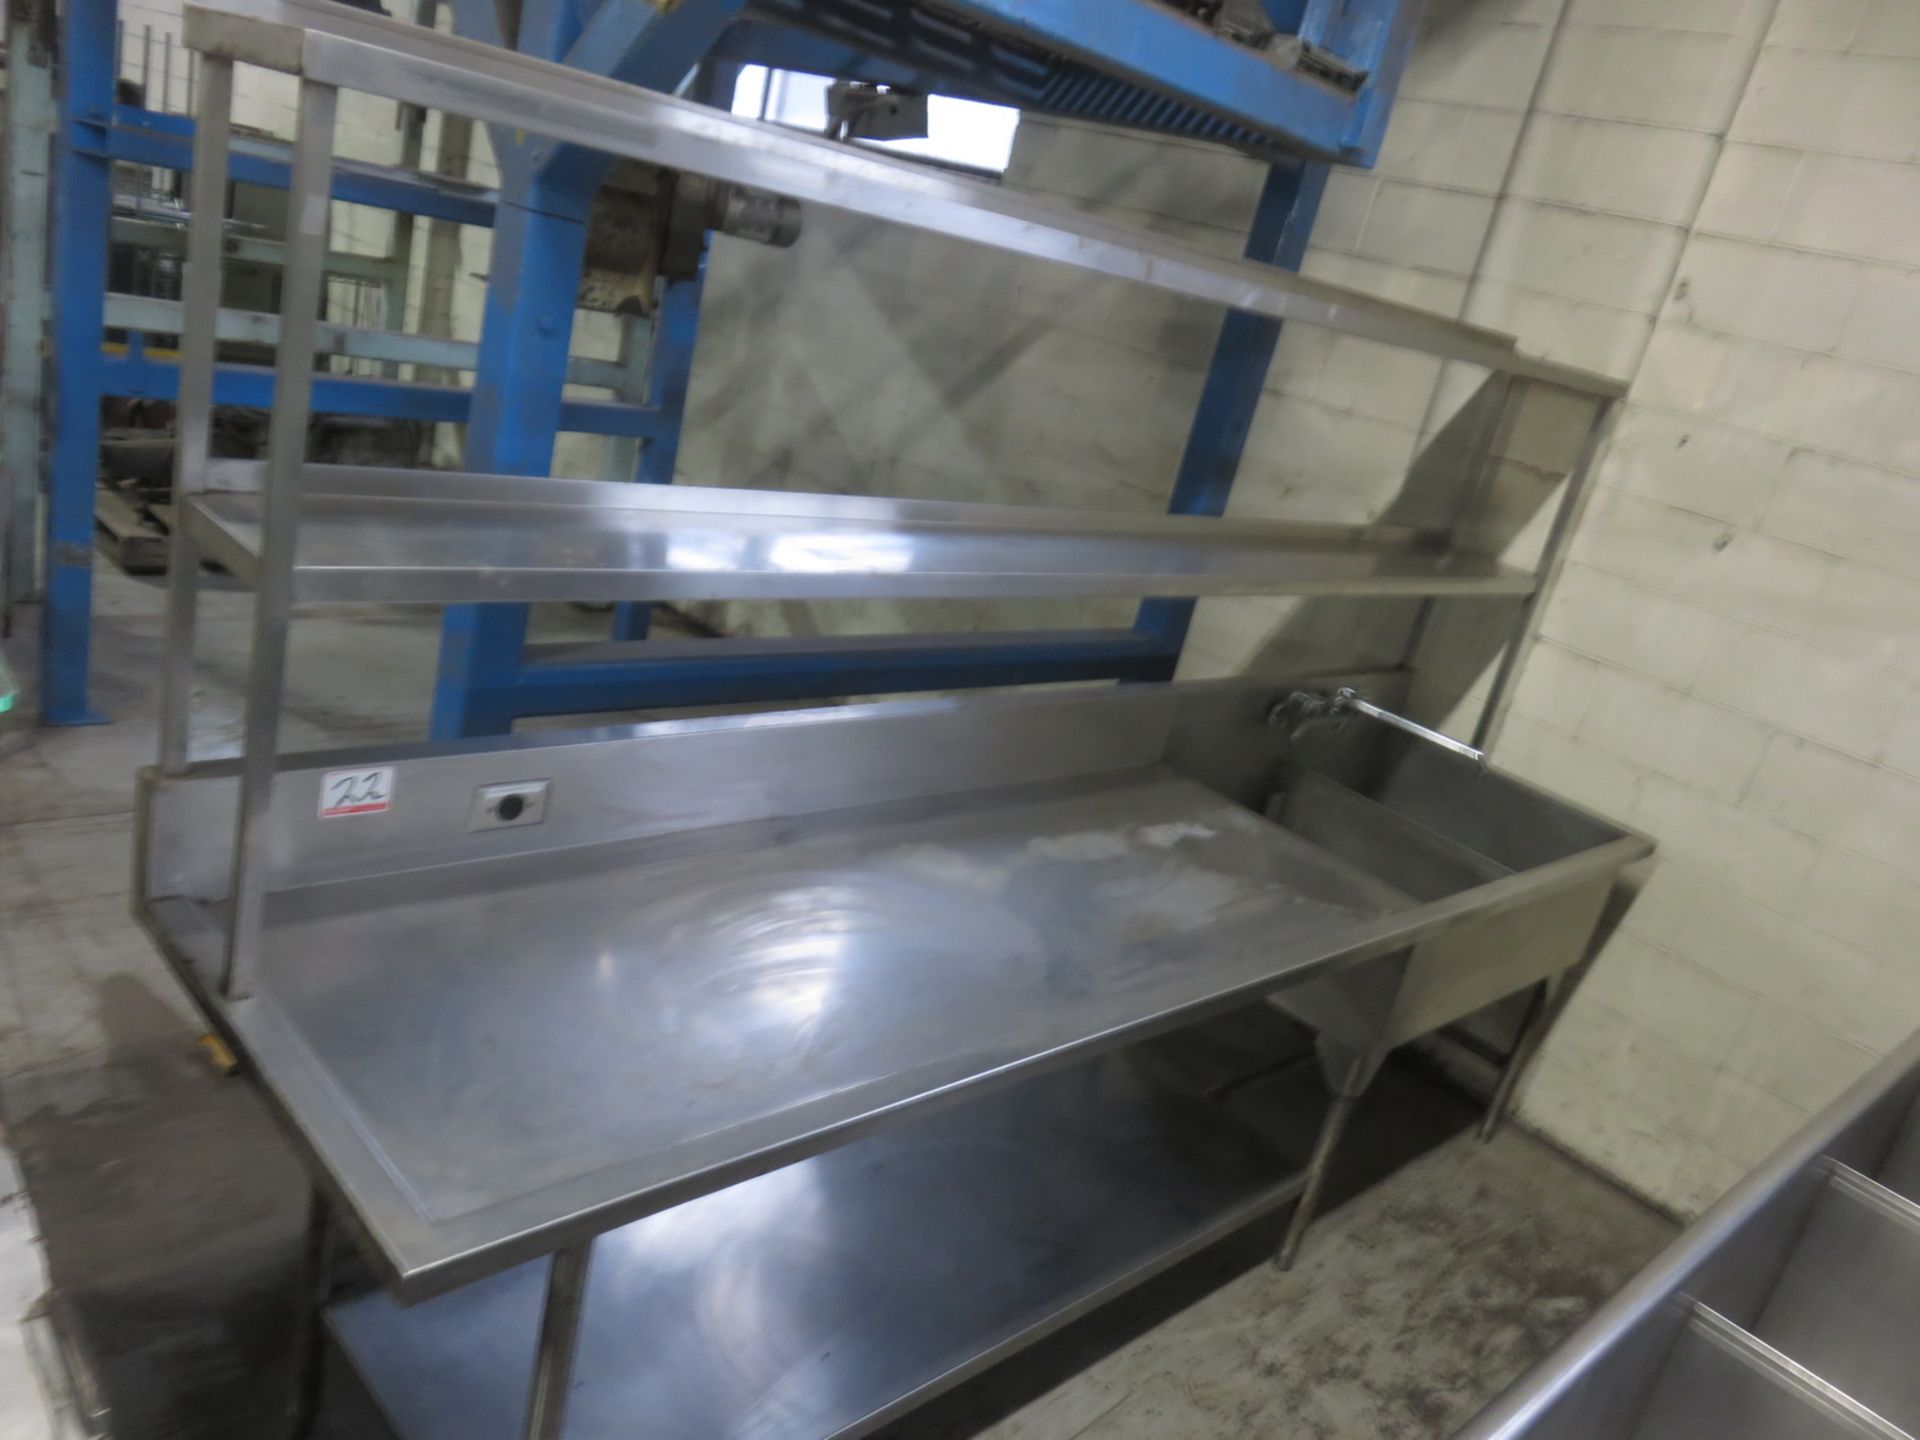 APPROX 10'L STAINLESS STEEL PREP TABLE W/ SHELVES & DROP-IN 2-COMPARTMENT SINK